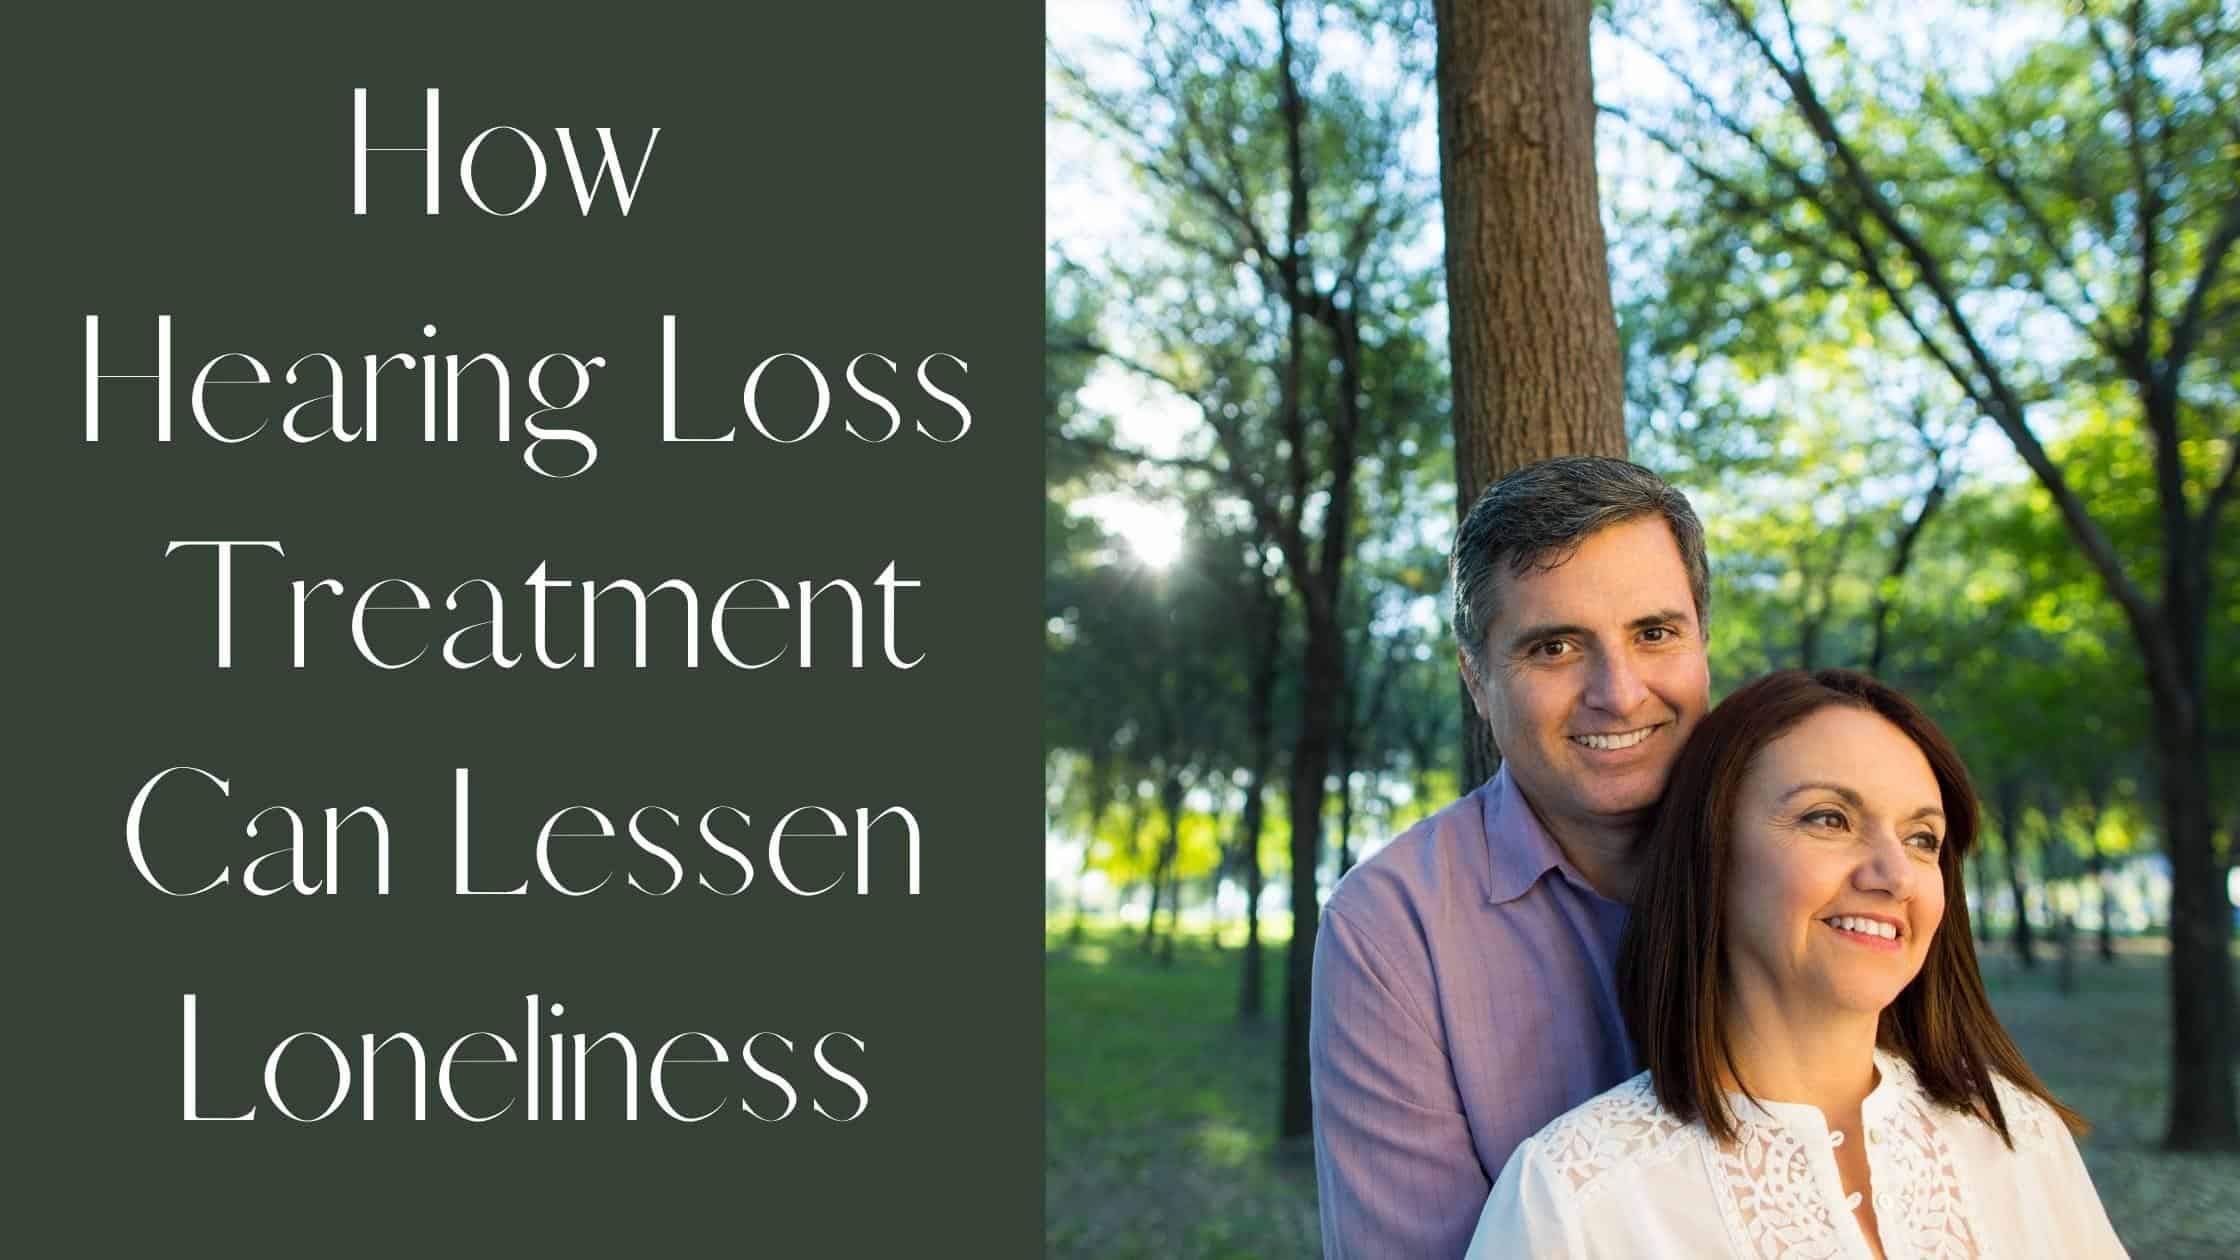 How Hearing Loss Treatment Can Lessen Loneliness